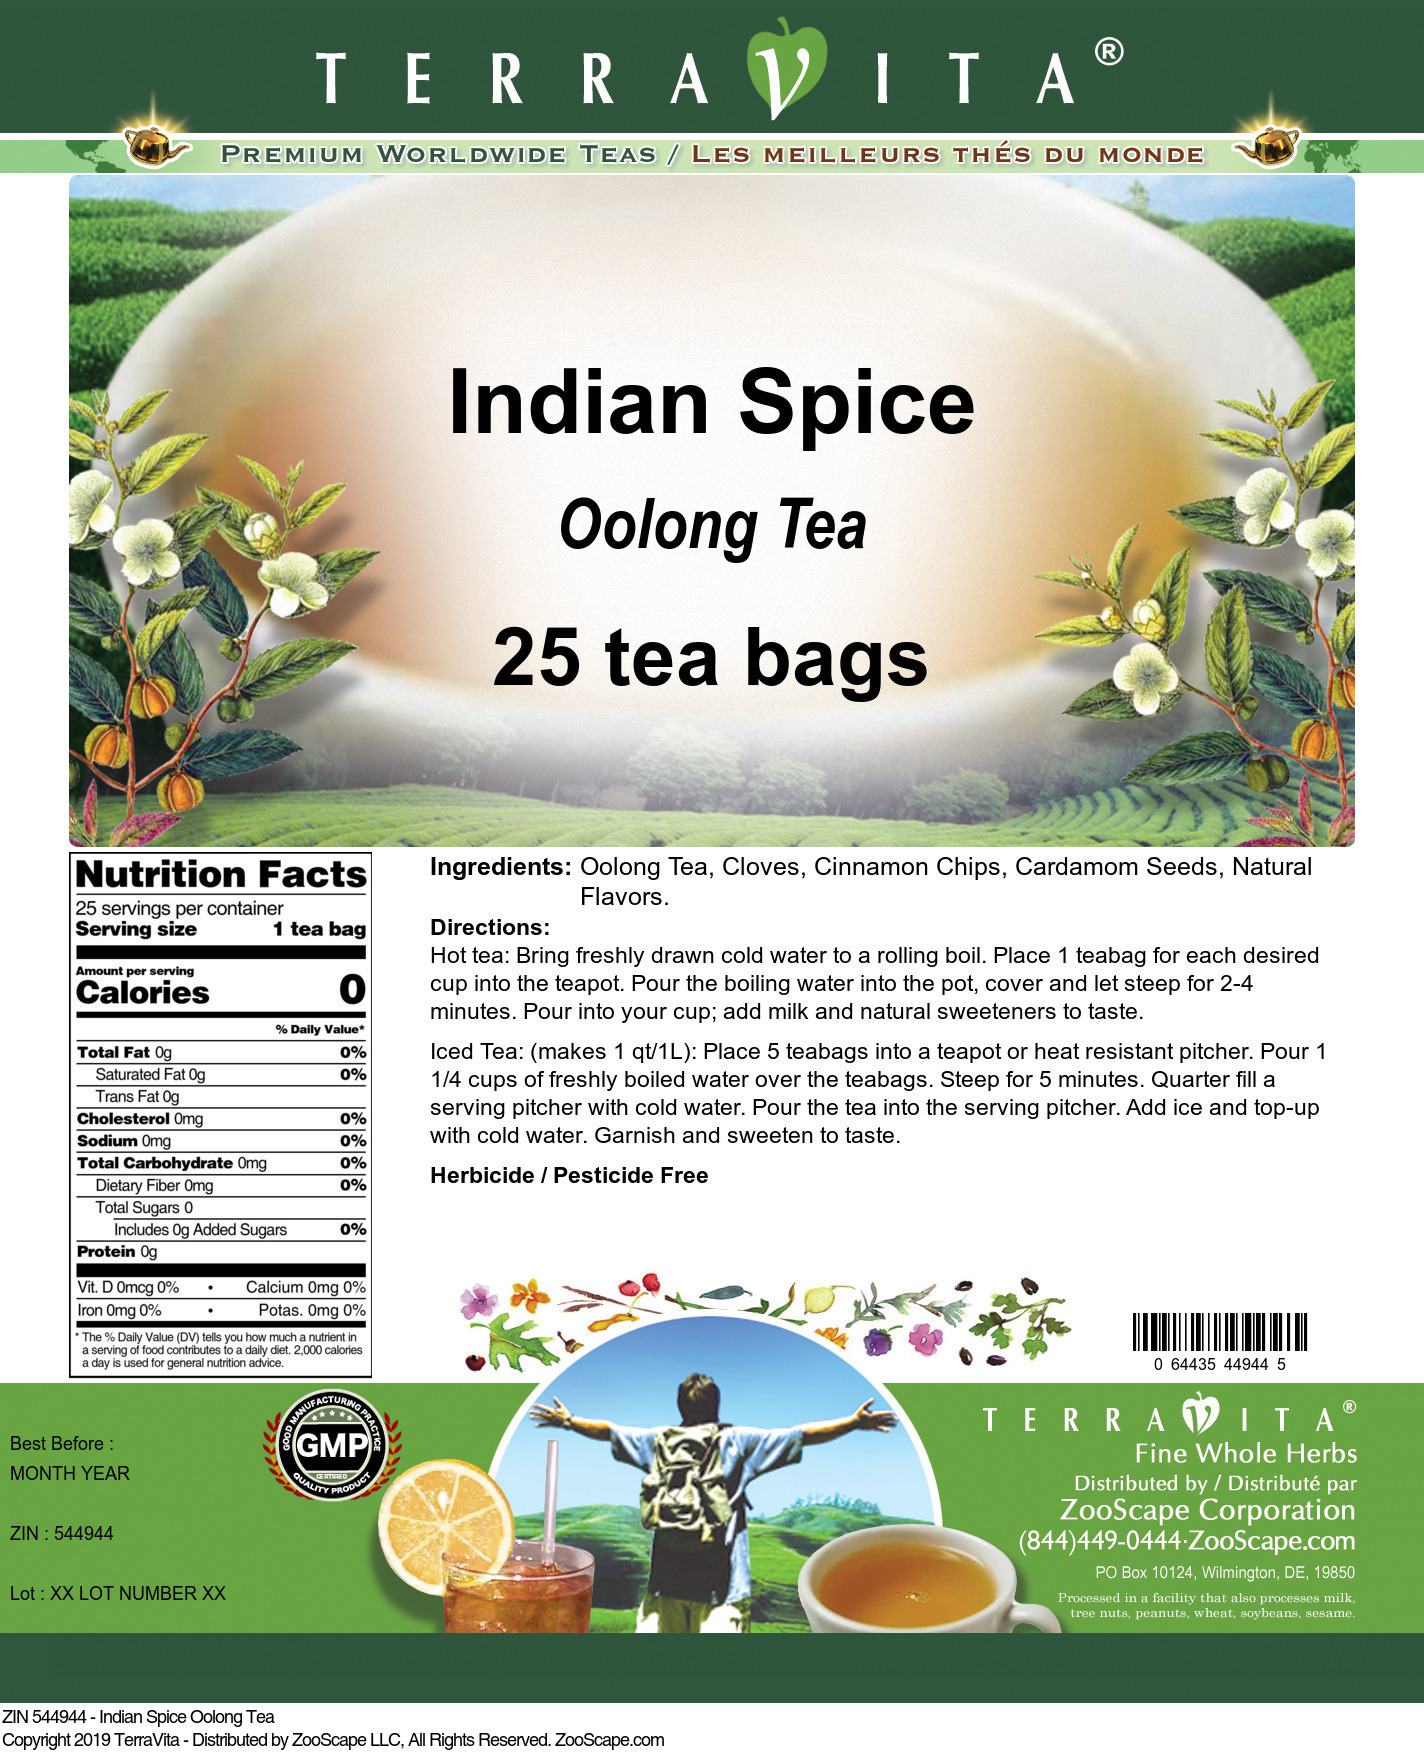 Indian Spice Oolong Tea - Label